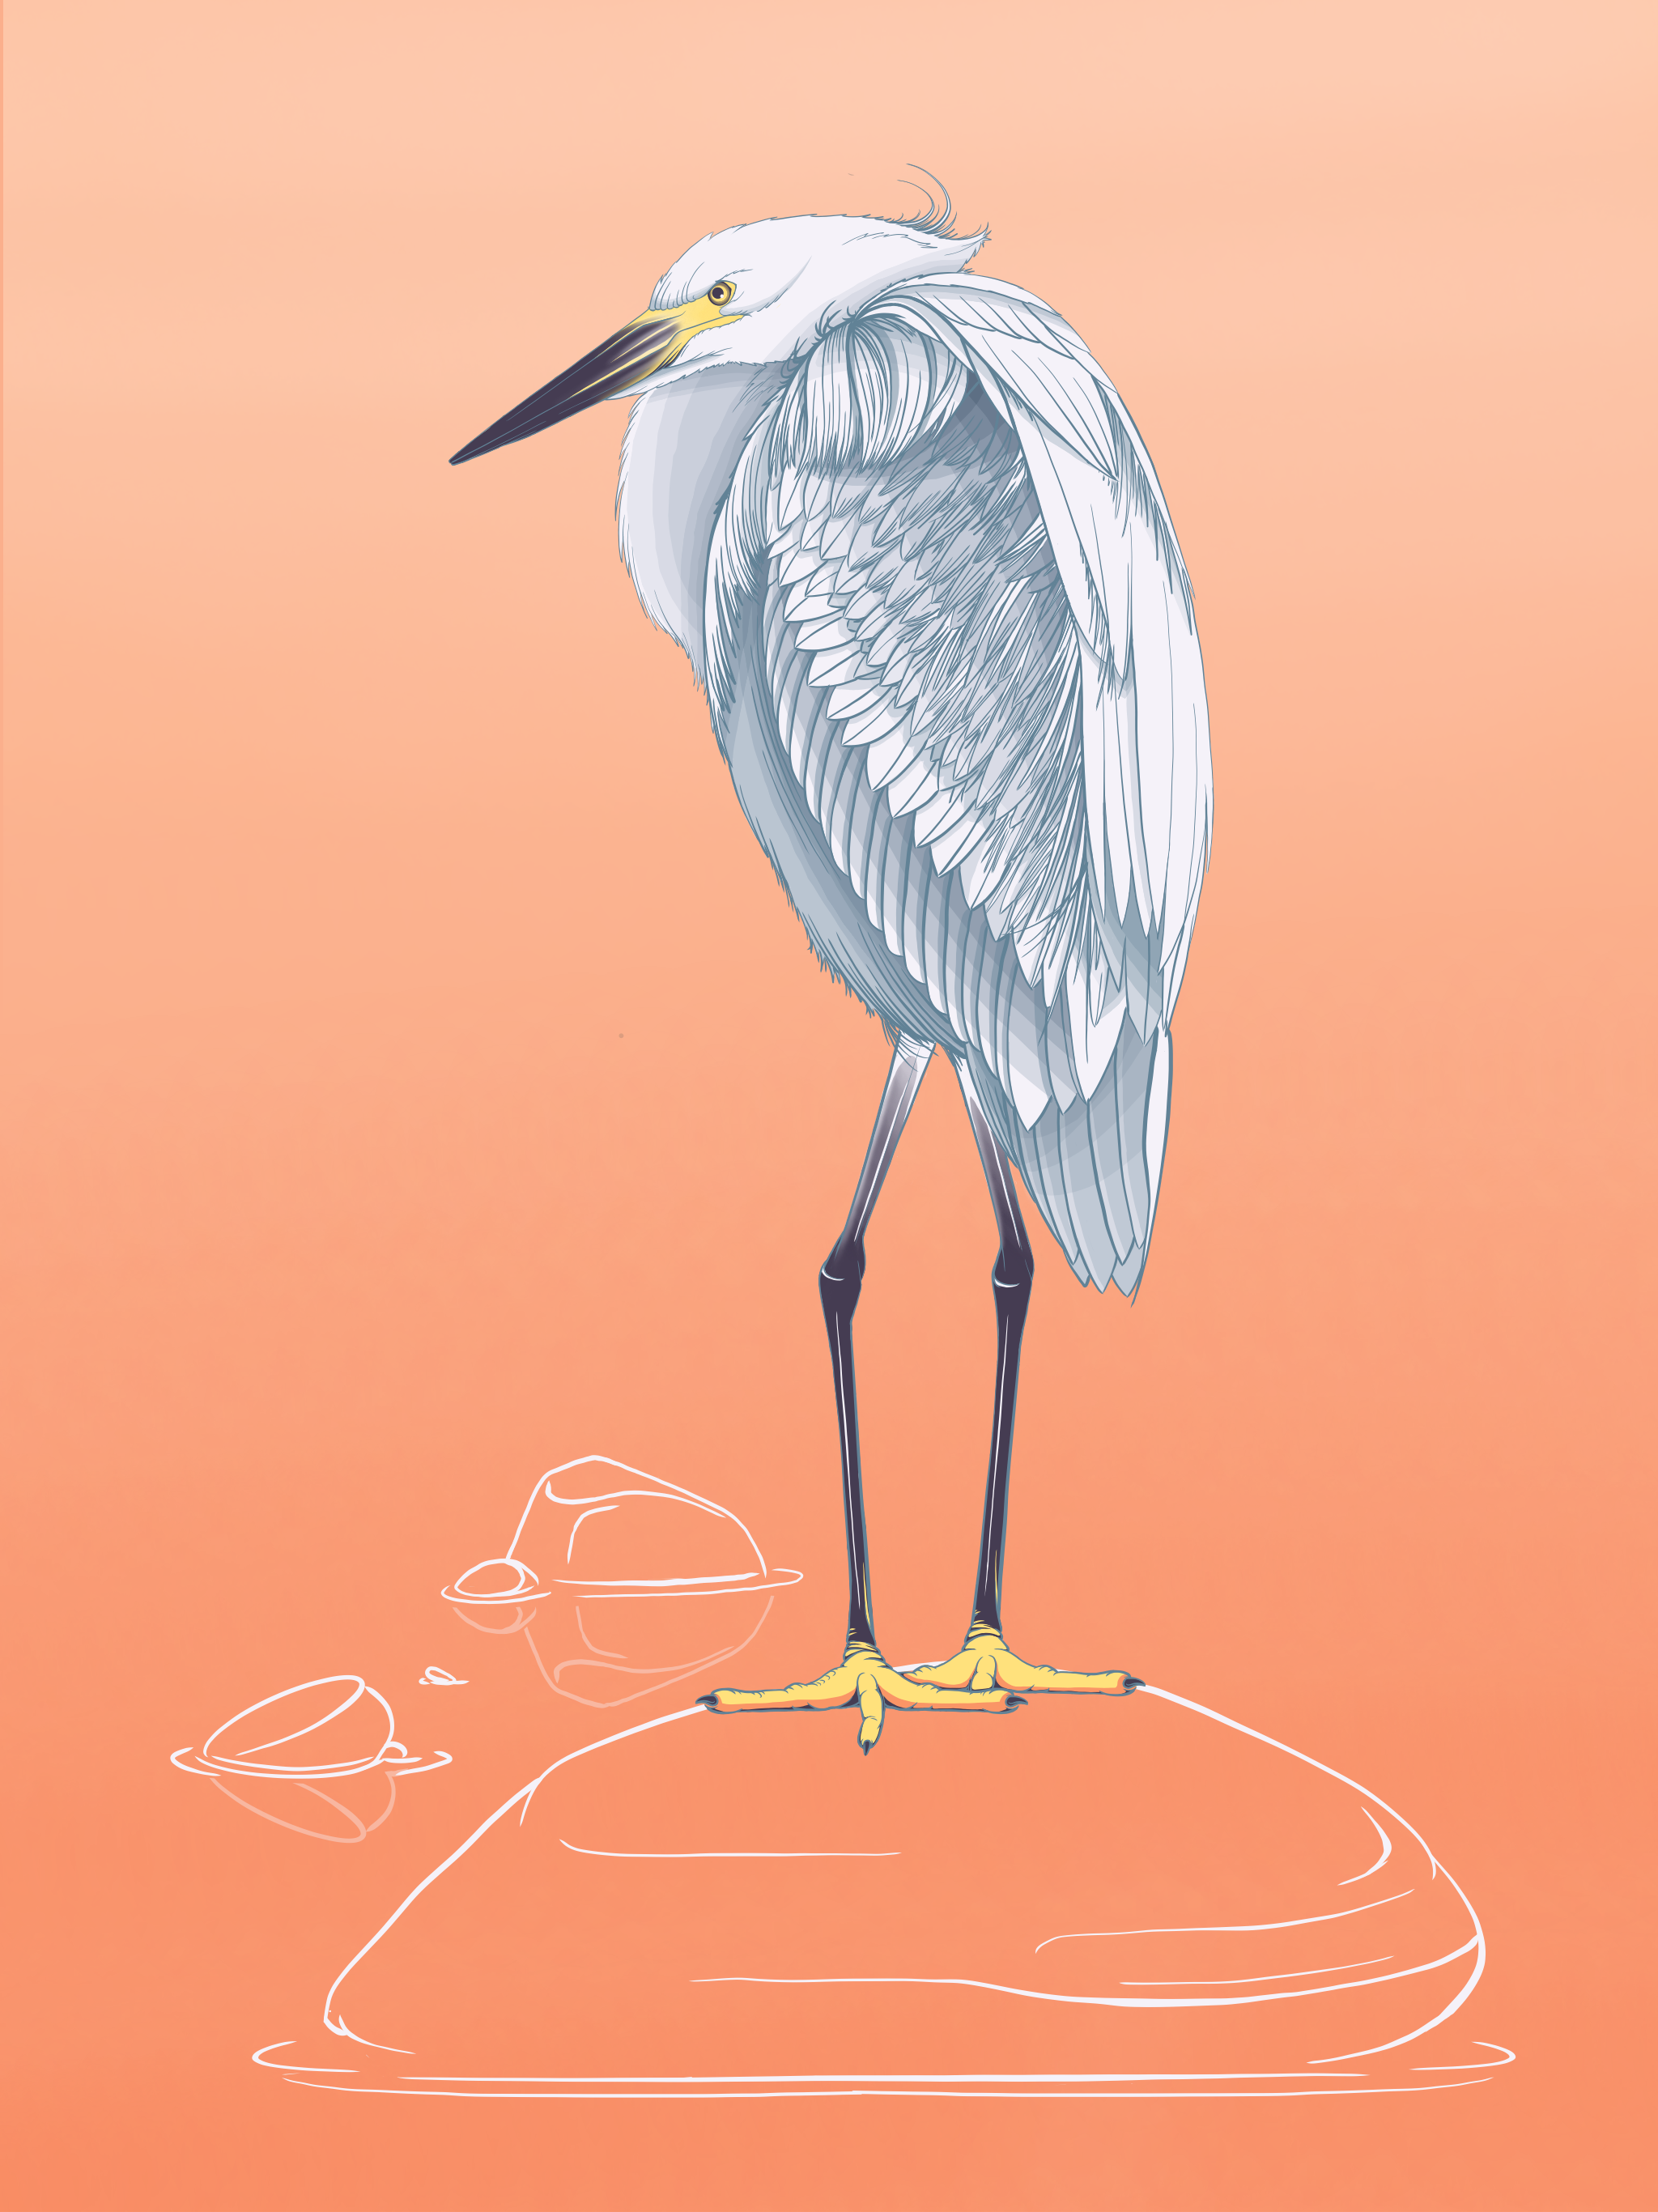 Illustration of a white egret standing on a rock in the water.